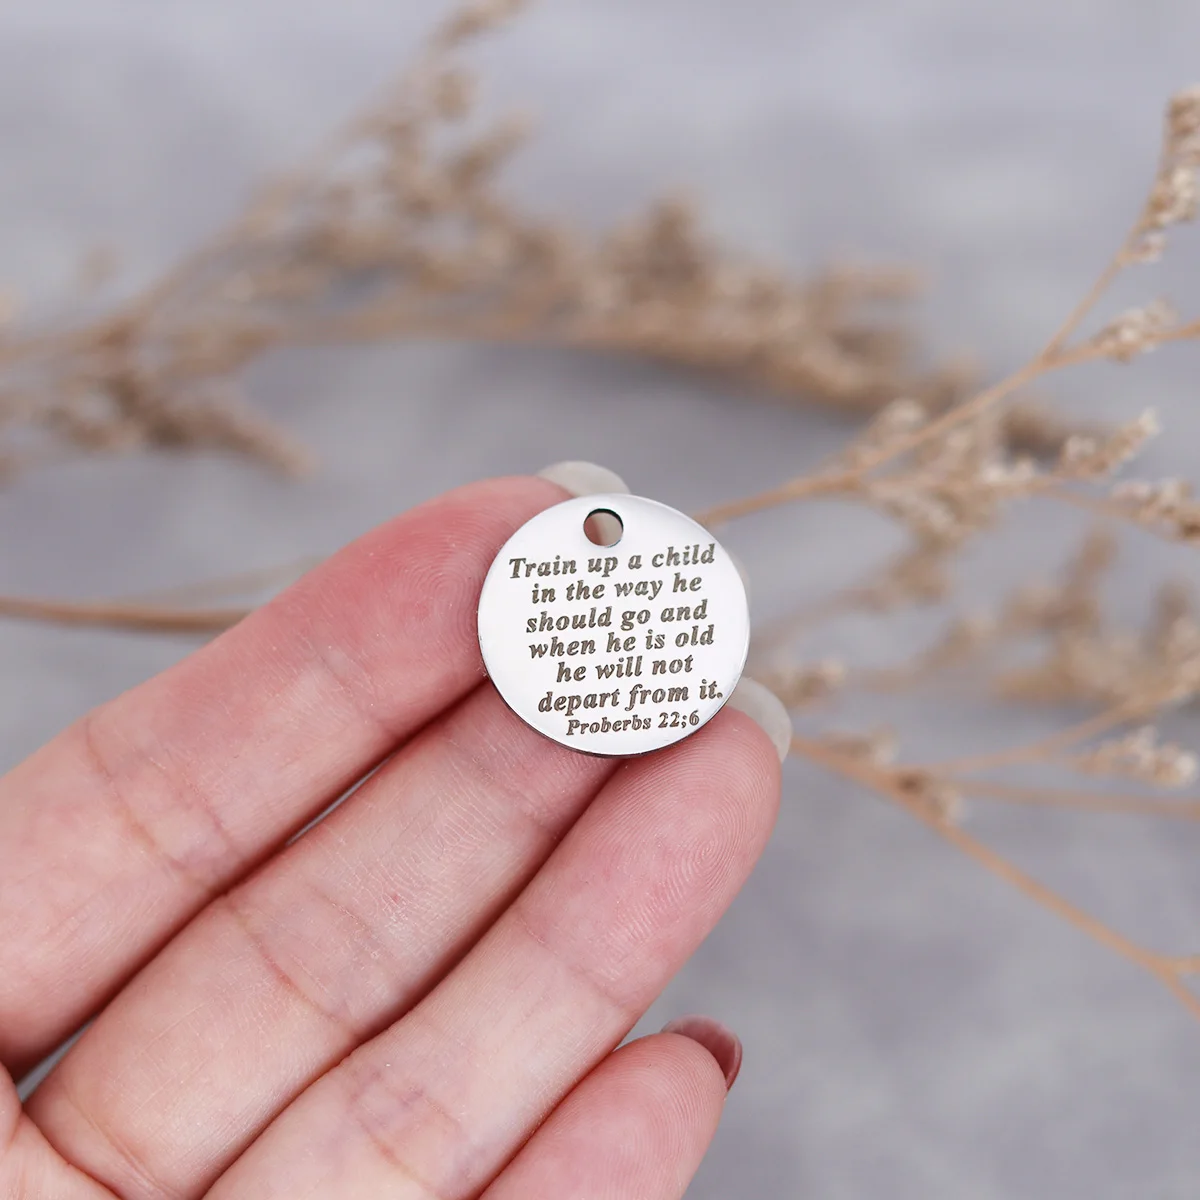 

3Pcs/lot Train Up A Child In The Way He Should Go And When He Is Old Will Not Depart From It Laser Engraved Charm Jewelry Diy